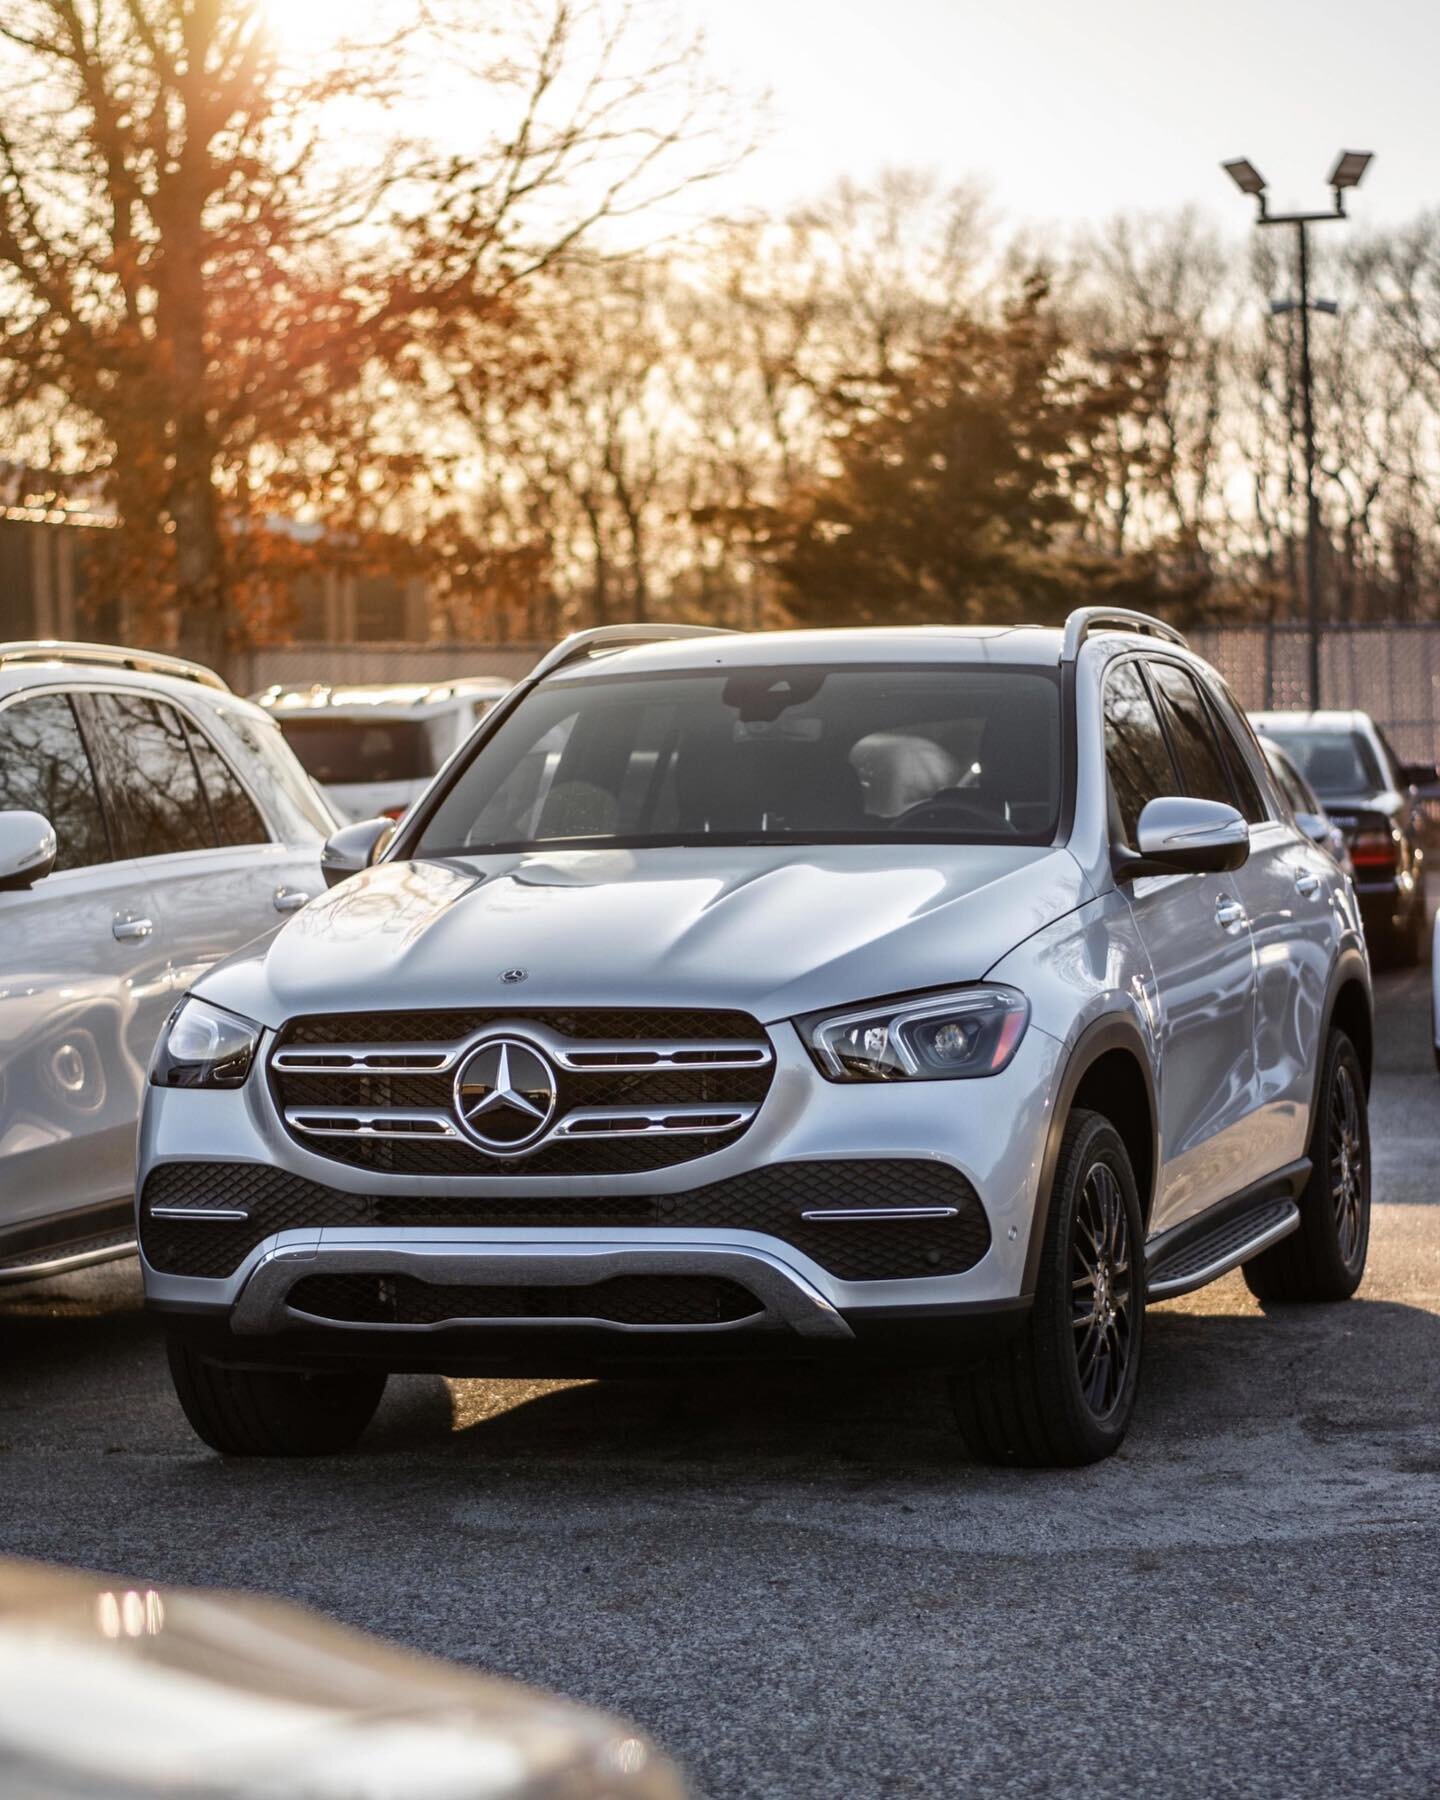 Last shot for the series of the Mercedes #GLE. Looking through the pictures, I was definitely a perfect golden hour shoot. Loved the lighting for these shots
.
.
.
Reminder to follow my automotive photography page: @nes.auto.photo .
.
.
.
.
#mercedes